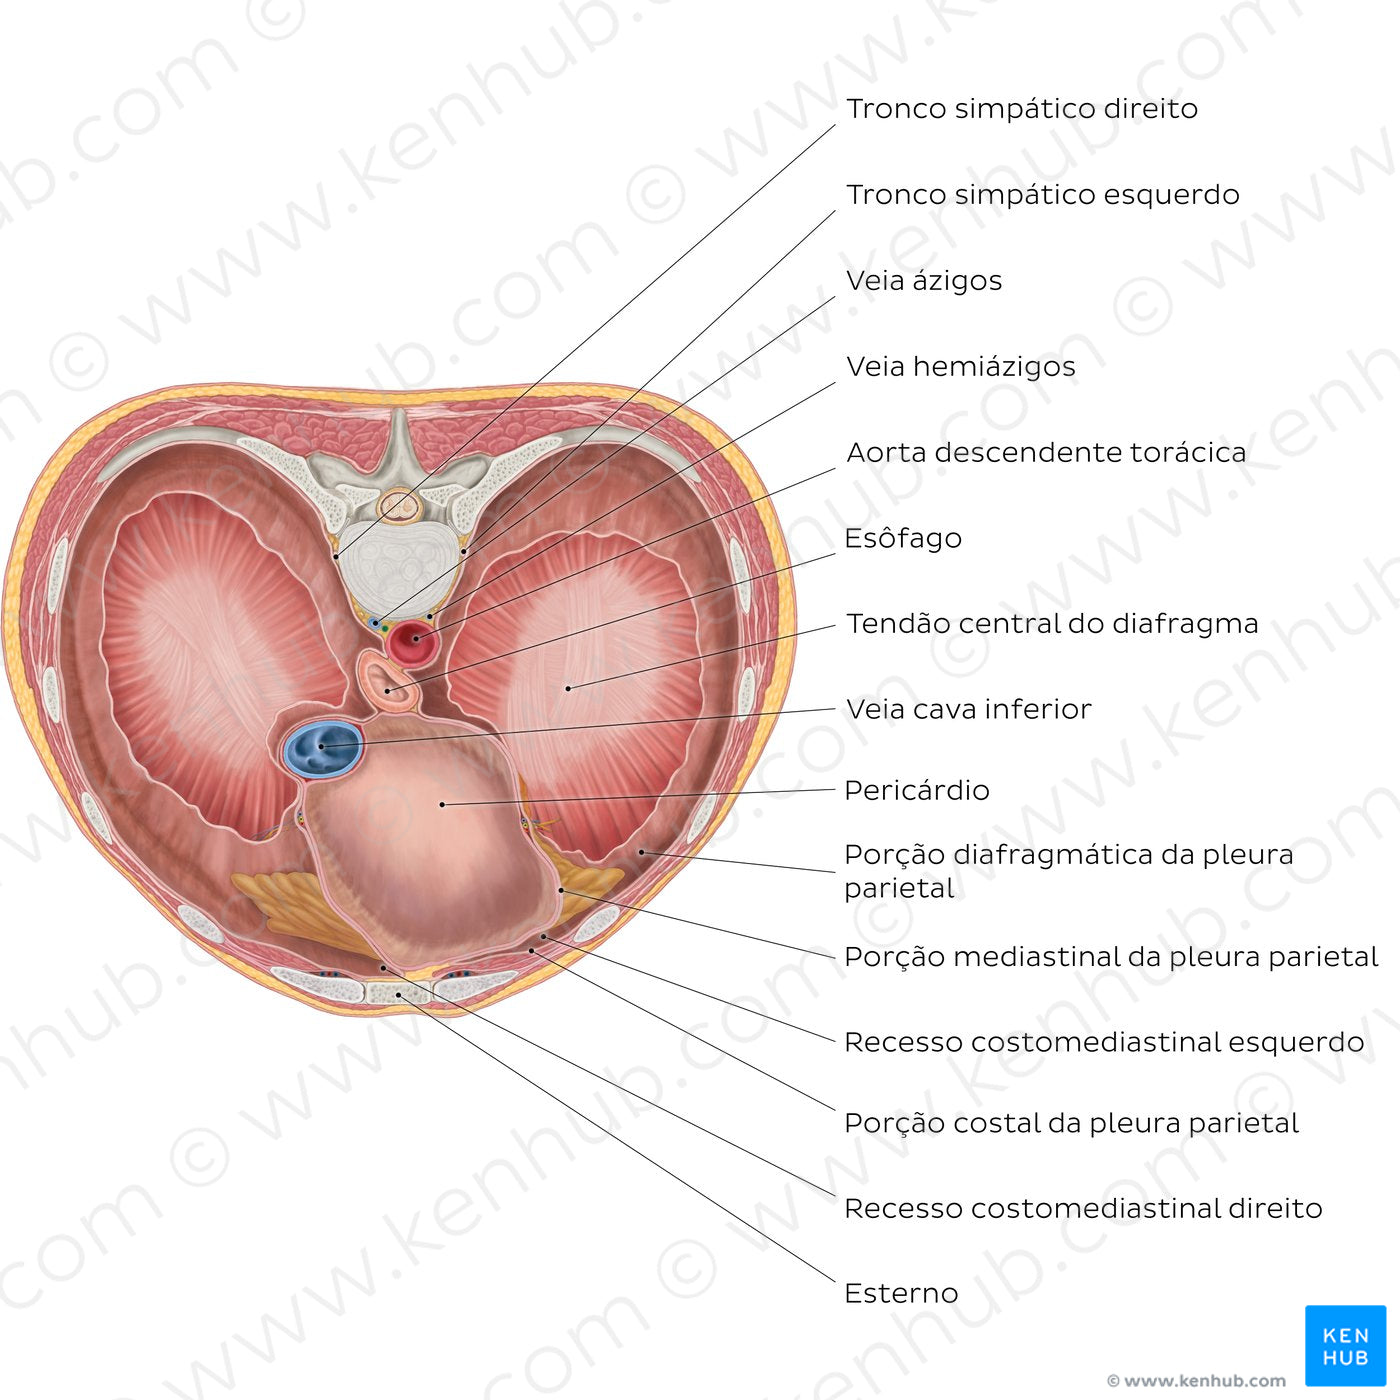 Thoracic surface of the diaphragm (Portuguese)